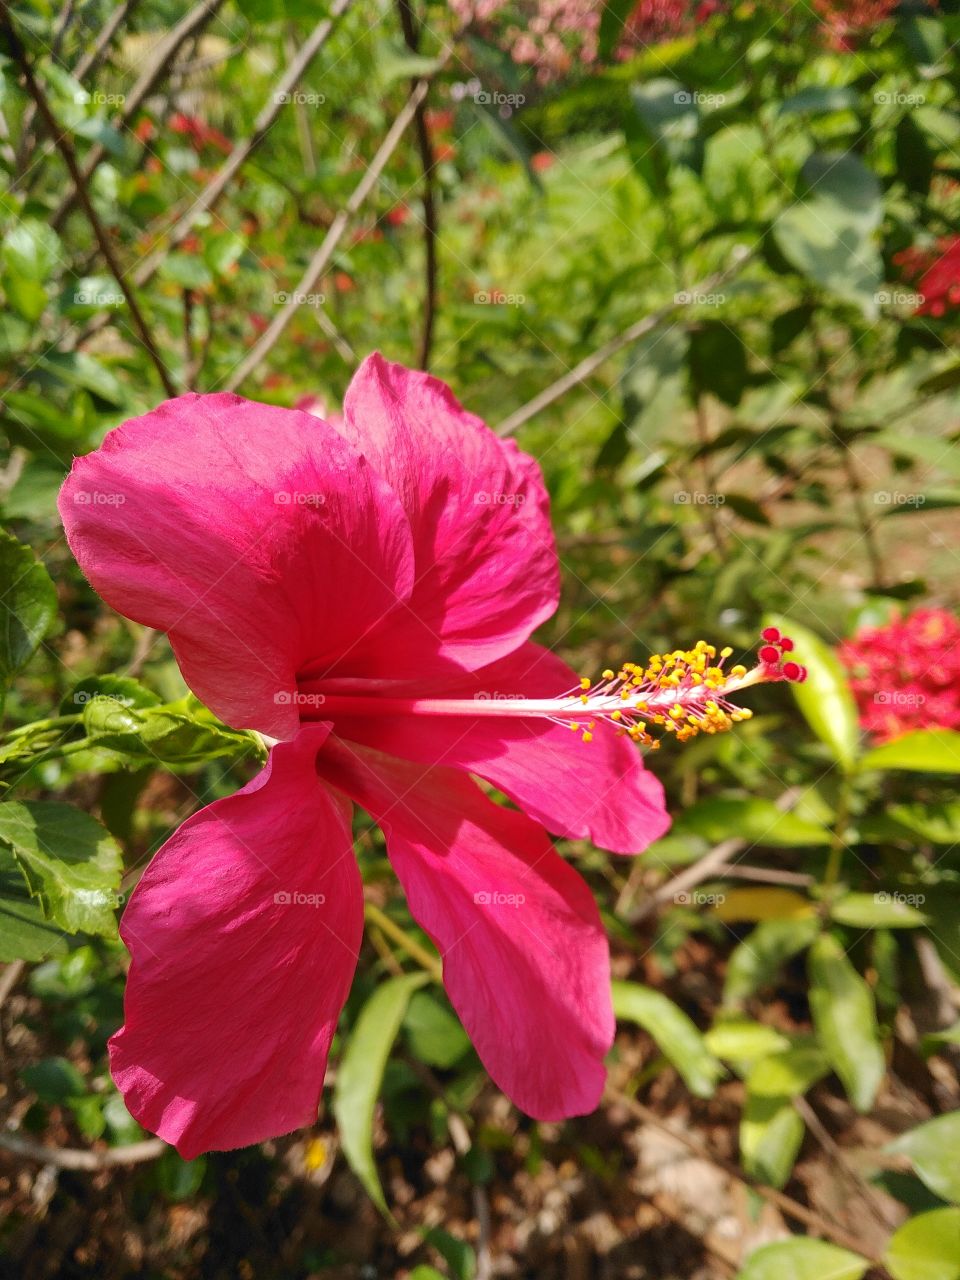 The beautiful hibiscus flower in morning sunlight energizes our body by providing awesome delight to eyes also seeing this flower gives us inner soul peace.